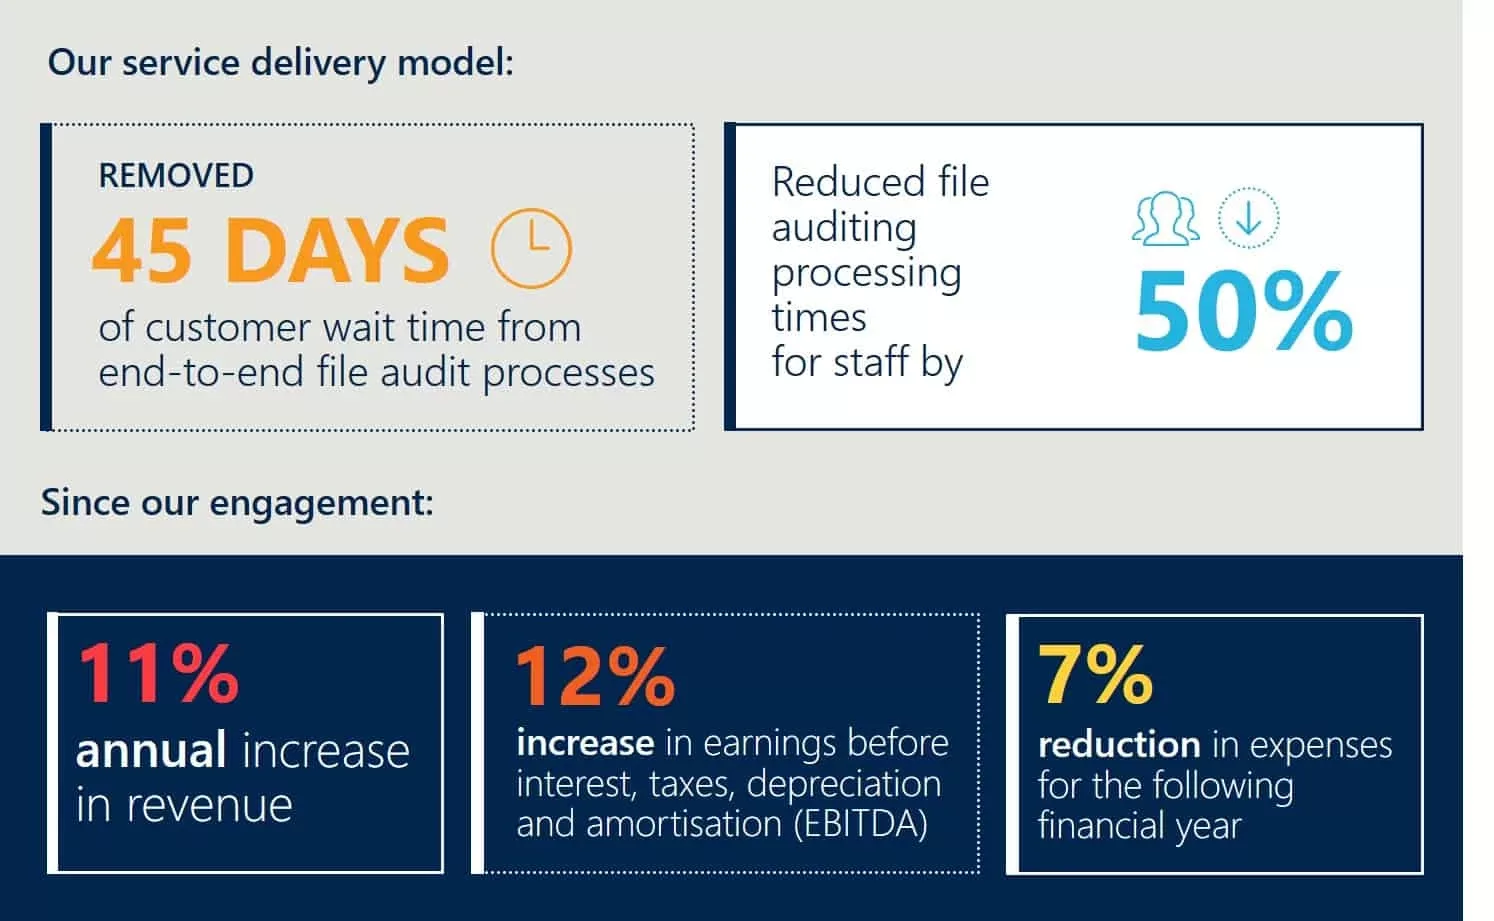 The new model improved customer service wait time and cut audit time